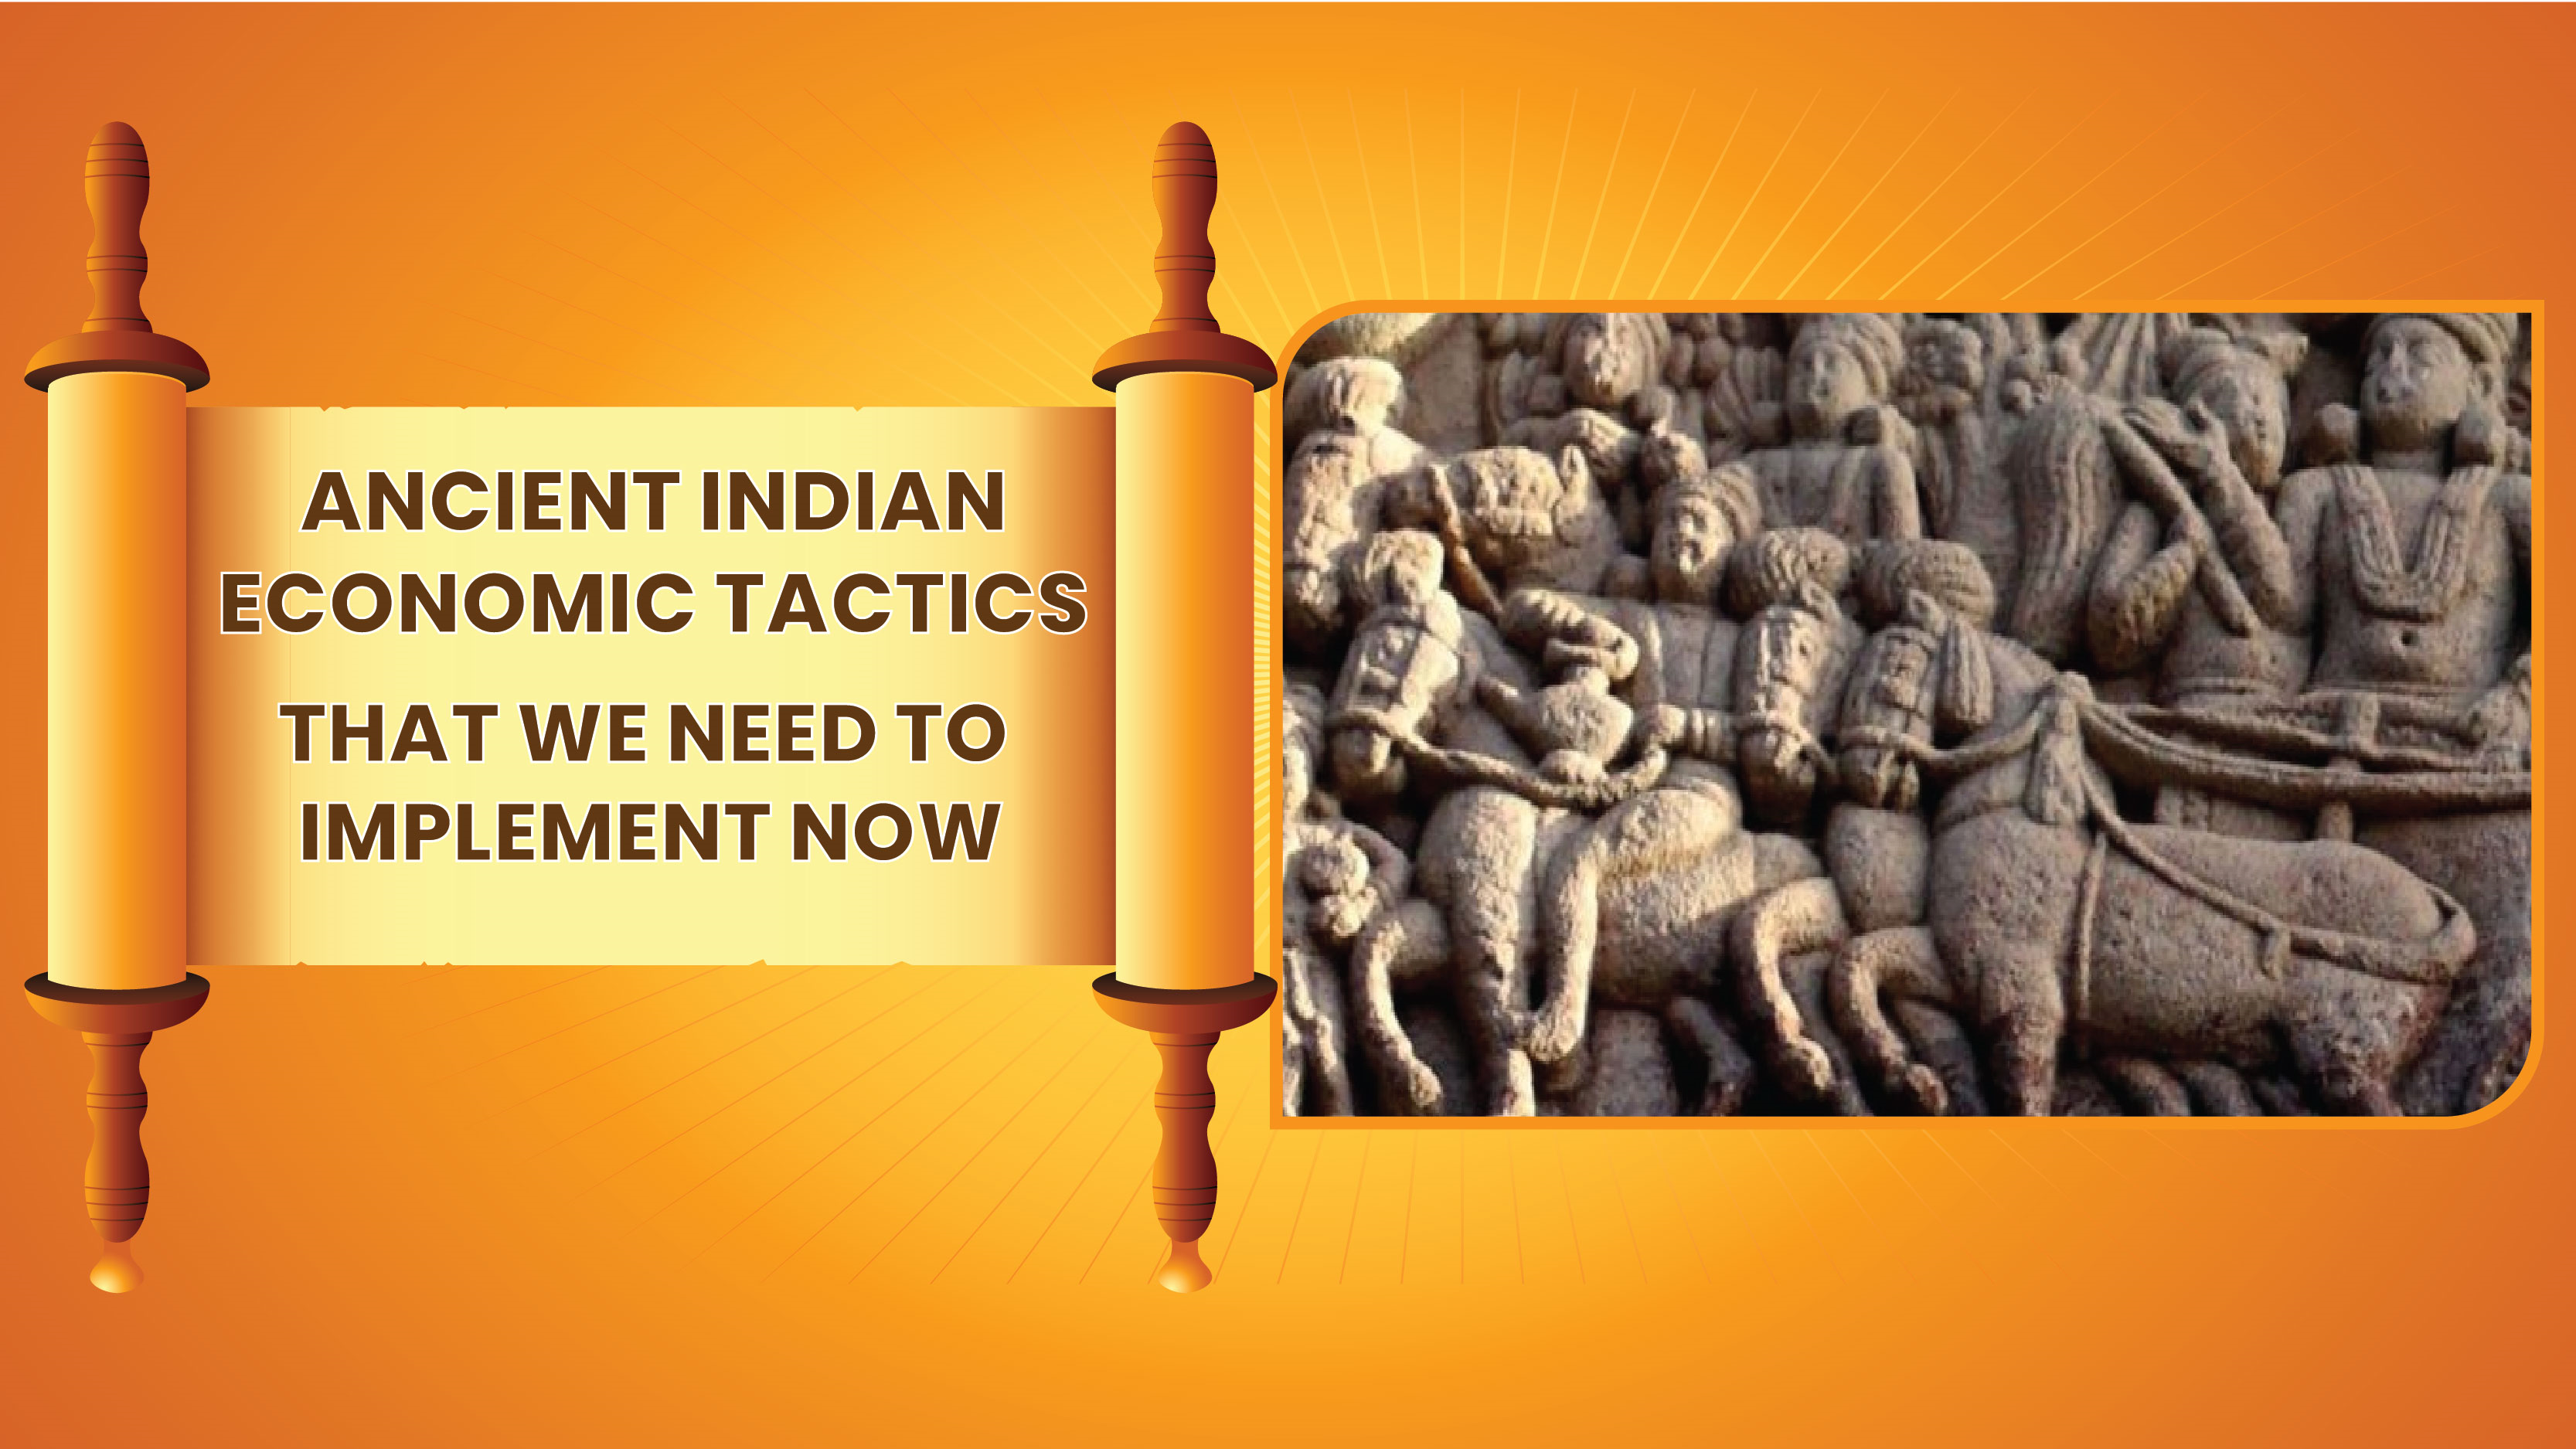 Ancient Indian Economic Tactics That We Need to Implement Now